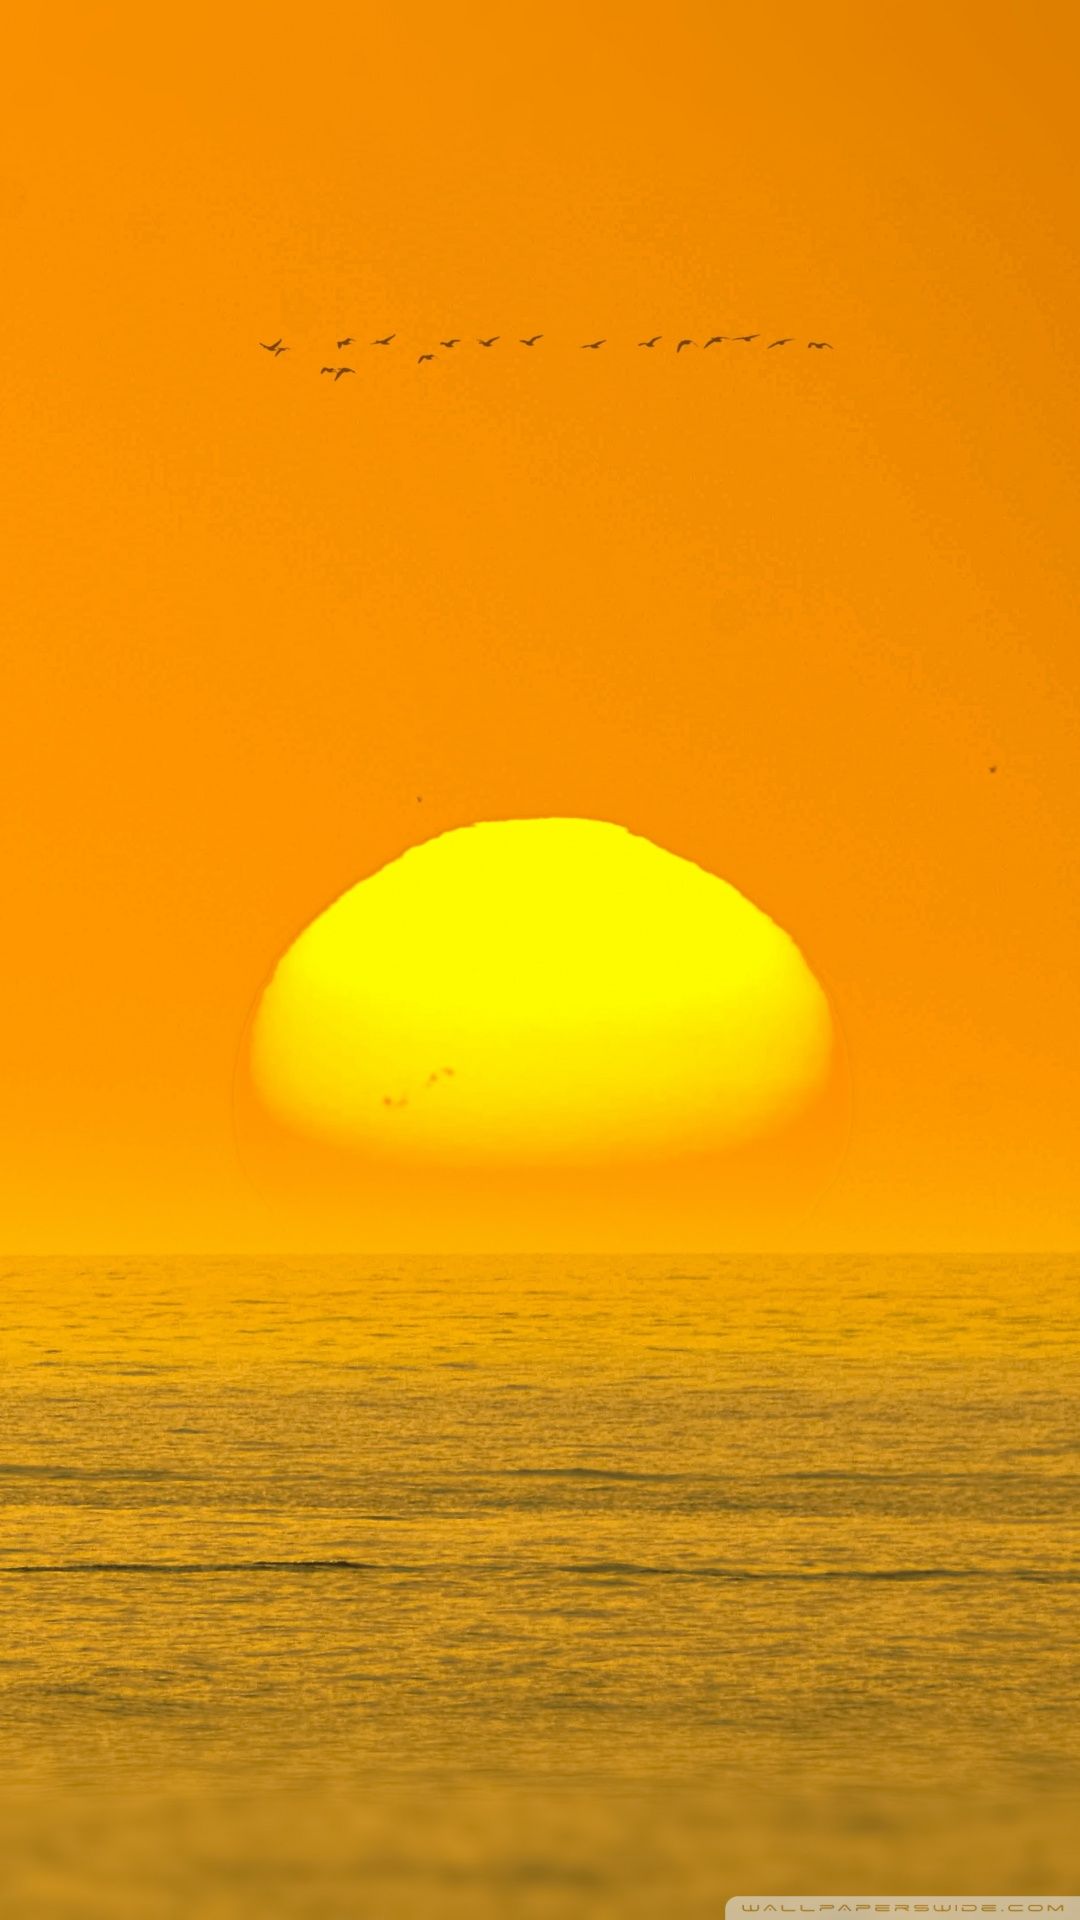 Sun setting over the sea with birds flying in the sky wallpaper 1242x2208 for iPhone 8 - Travel